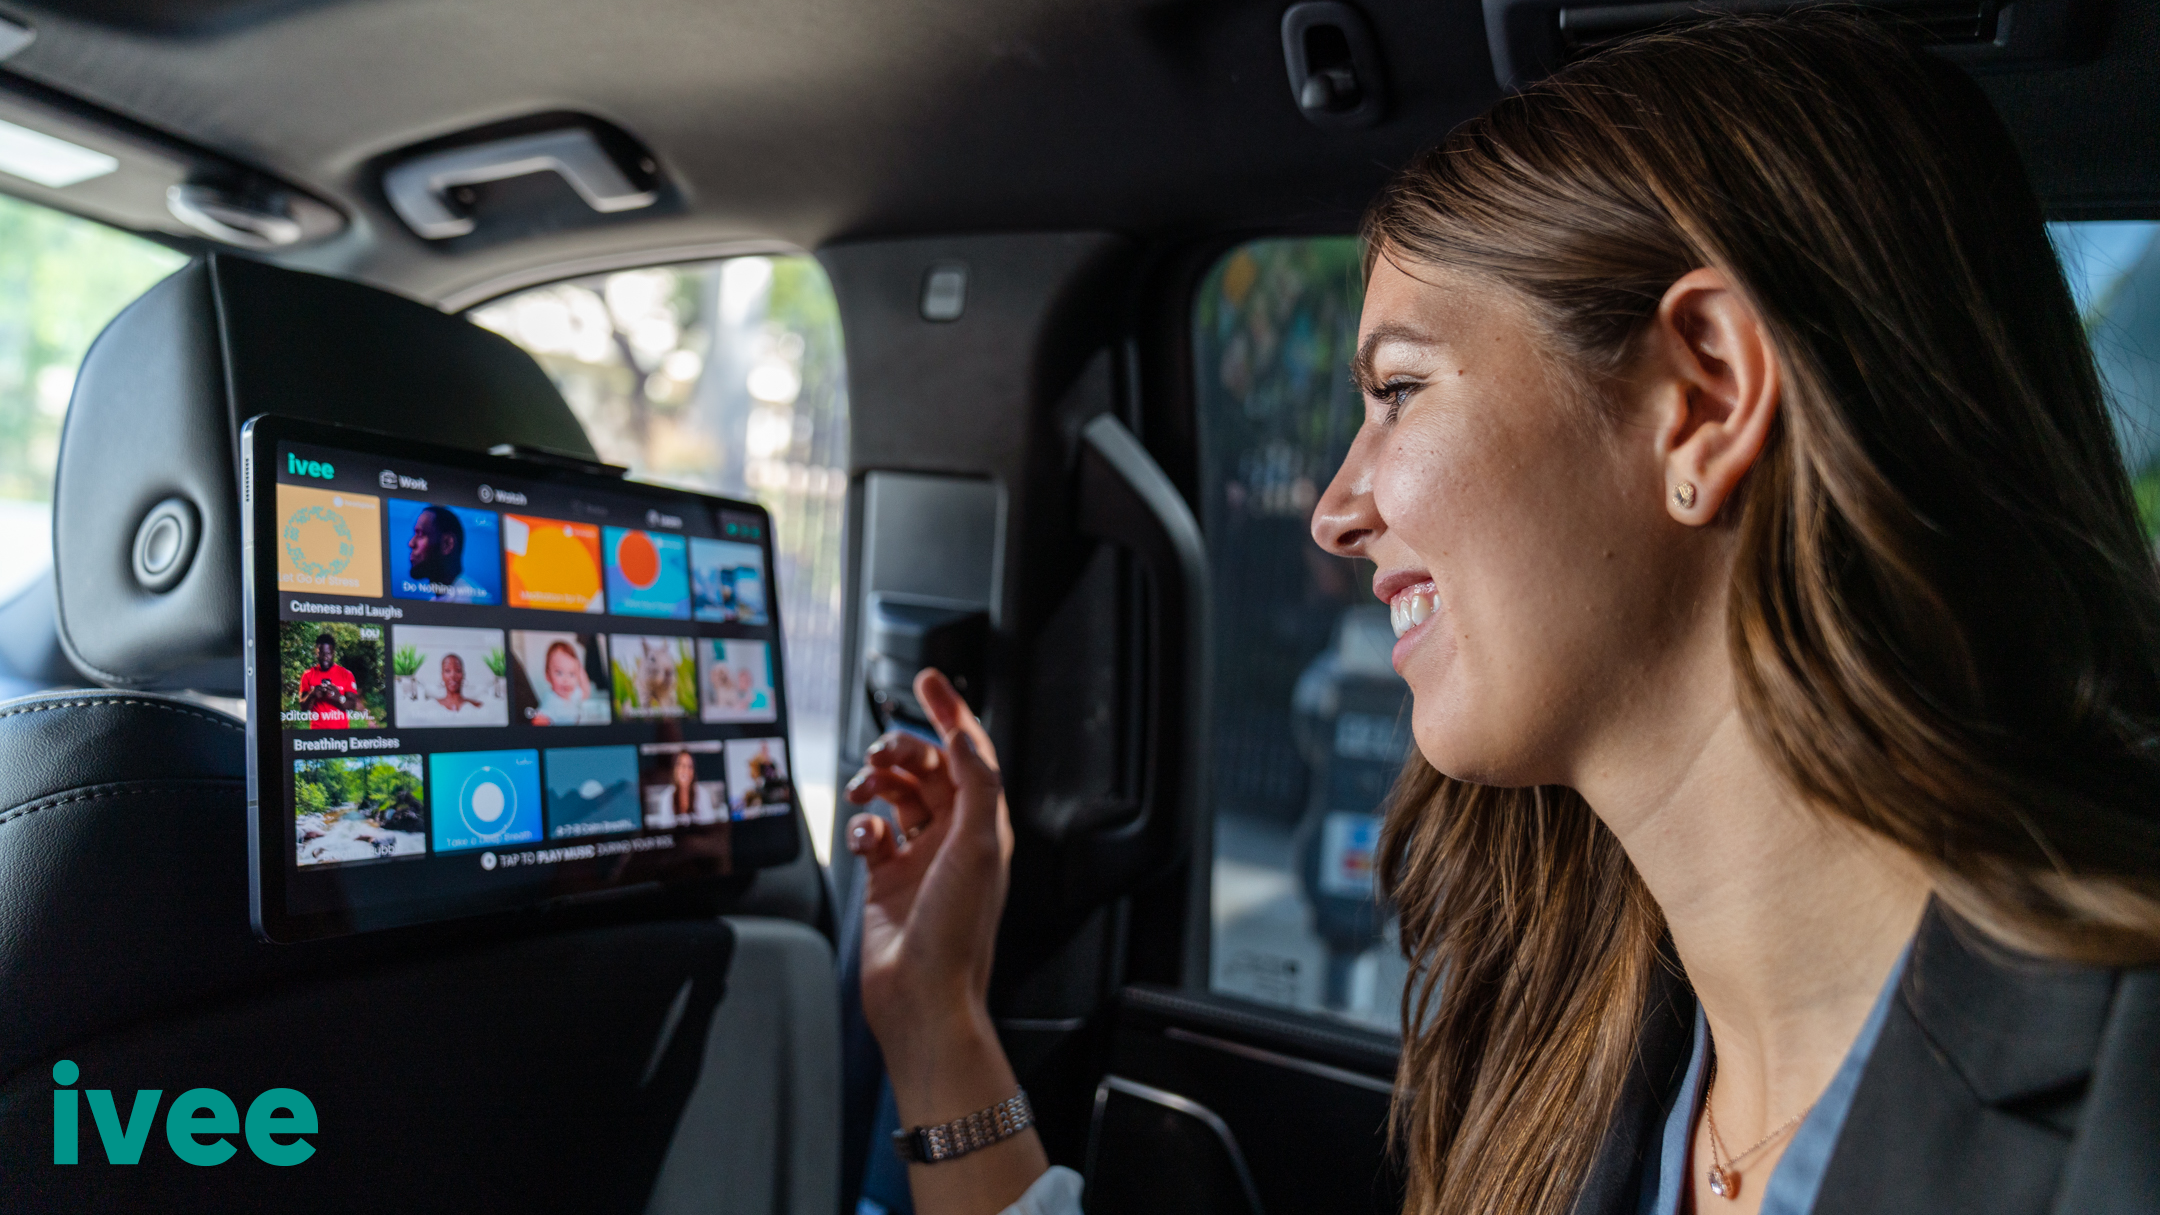 When a passenger enters a cab with Ivee’s “Smart Taxi,” they can choose their own content.